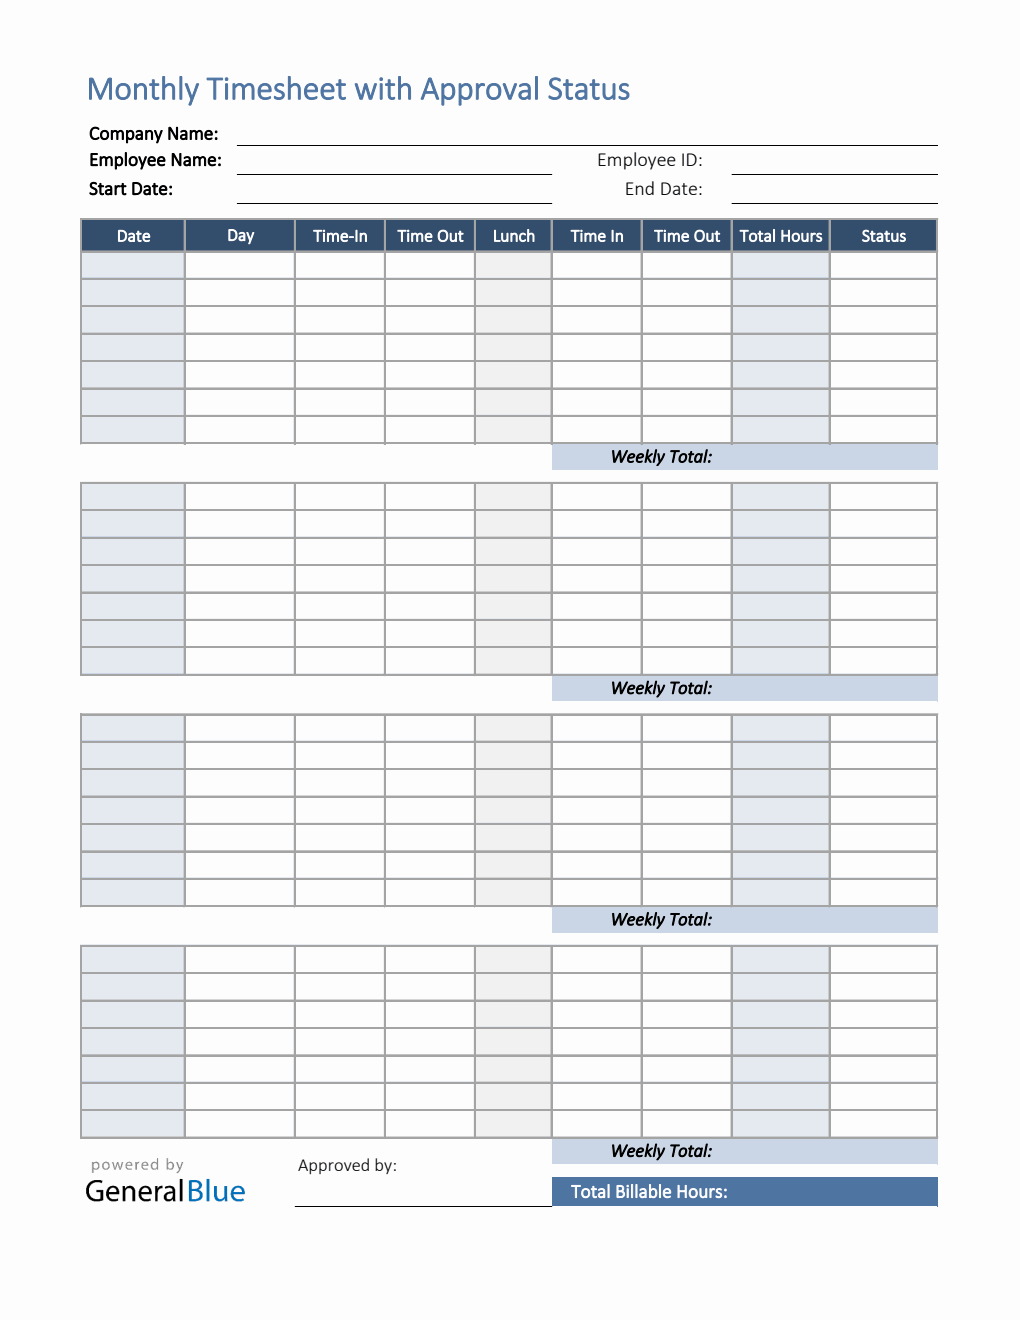 Monthly Timesheet With Approval Status in Excel